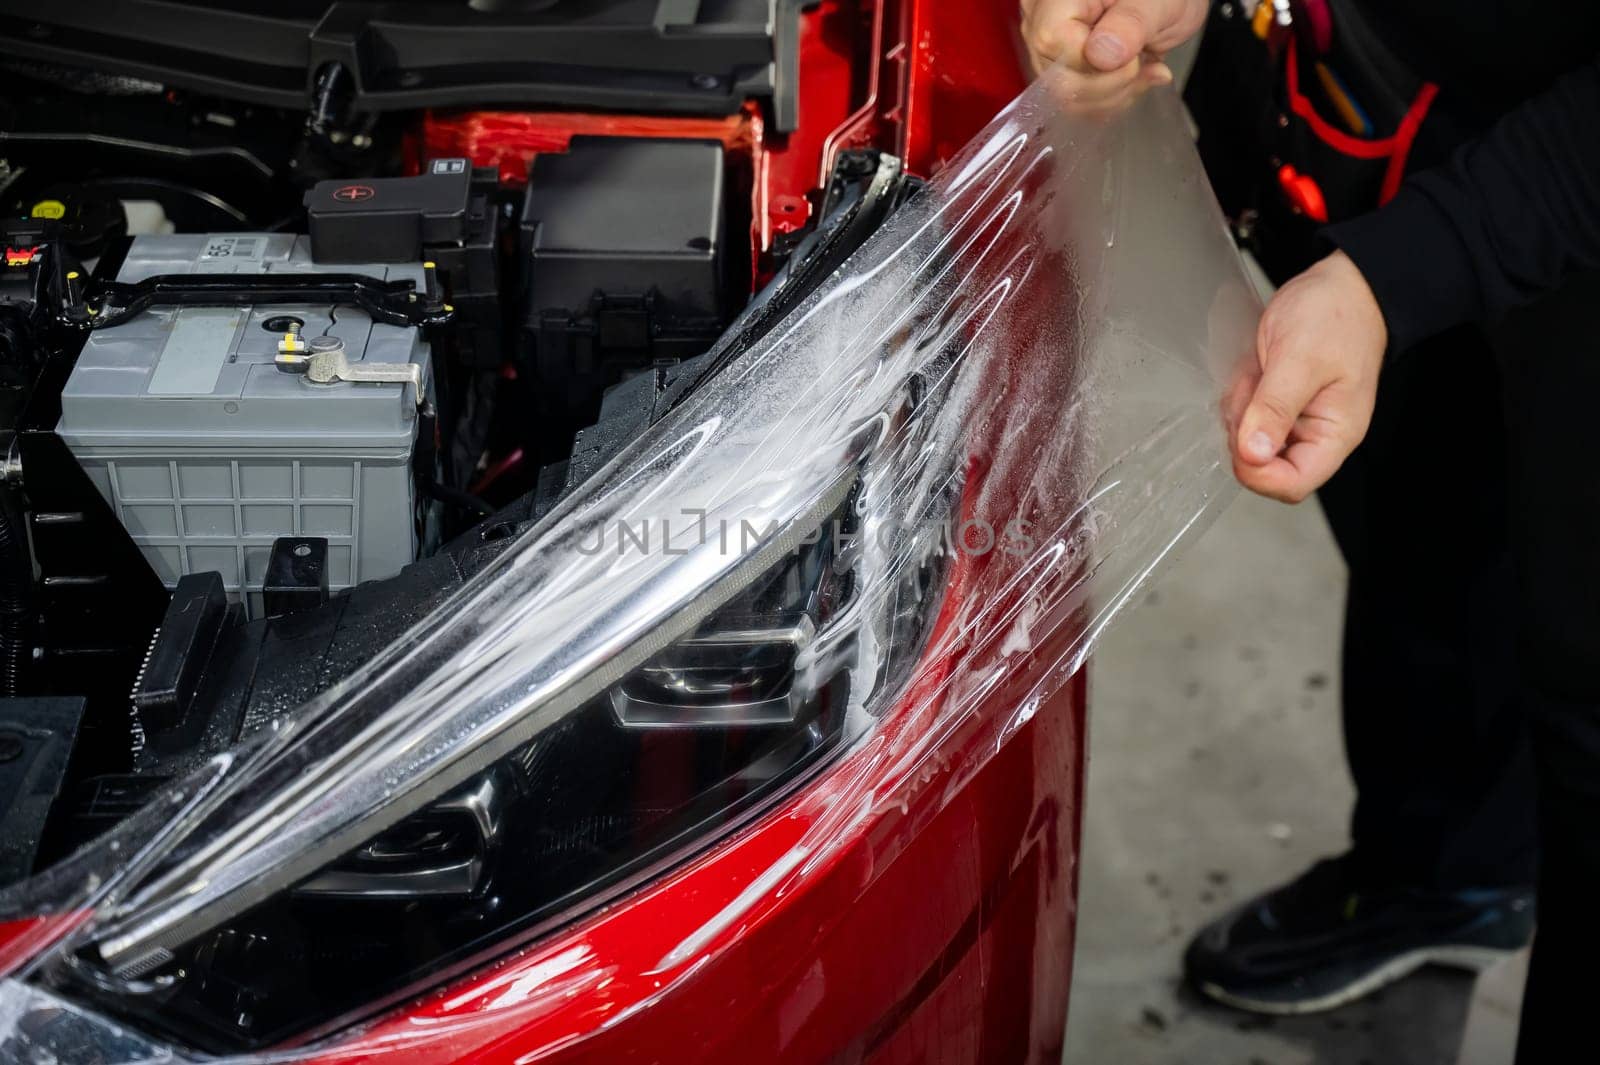 The master applies vinyl film to the headlight of a red car. Closeup view on worker detailer hand smoothing with a scraper protective film. by mrwed54